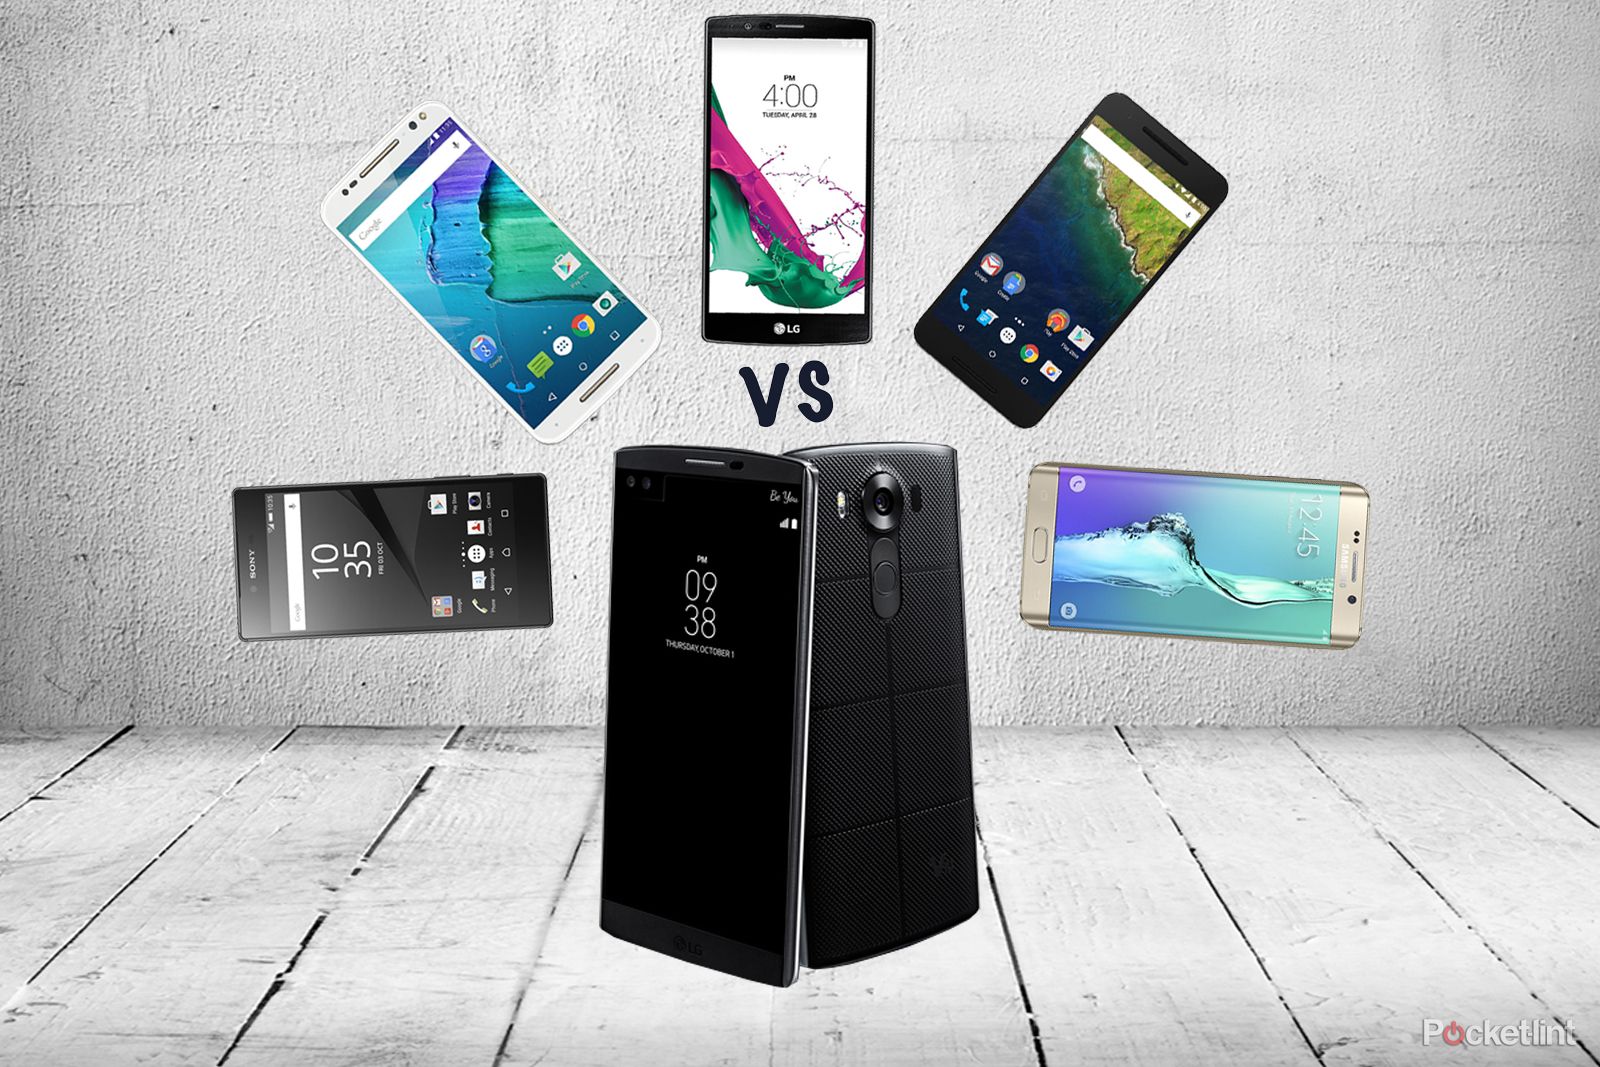 lg v10 vs galaxy s6 edge plus xperia z5 premium nexus 6p moto x style and lg g4 what s the difference  image 1